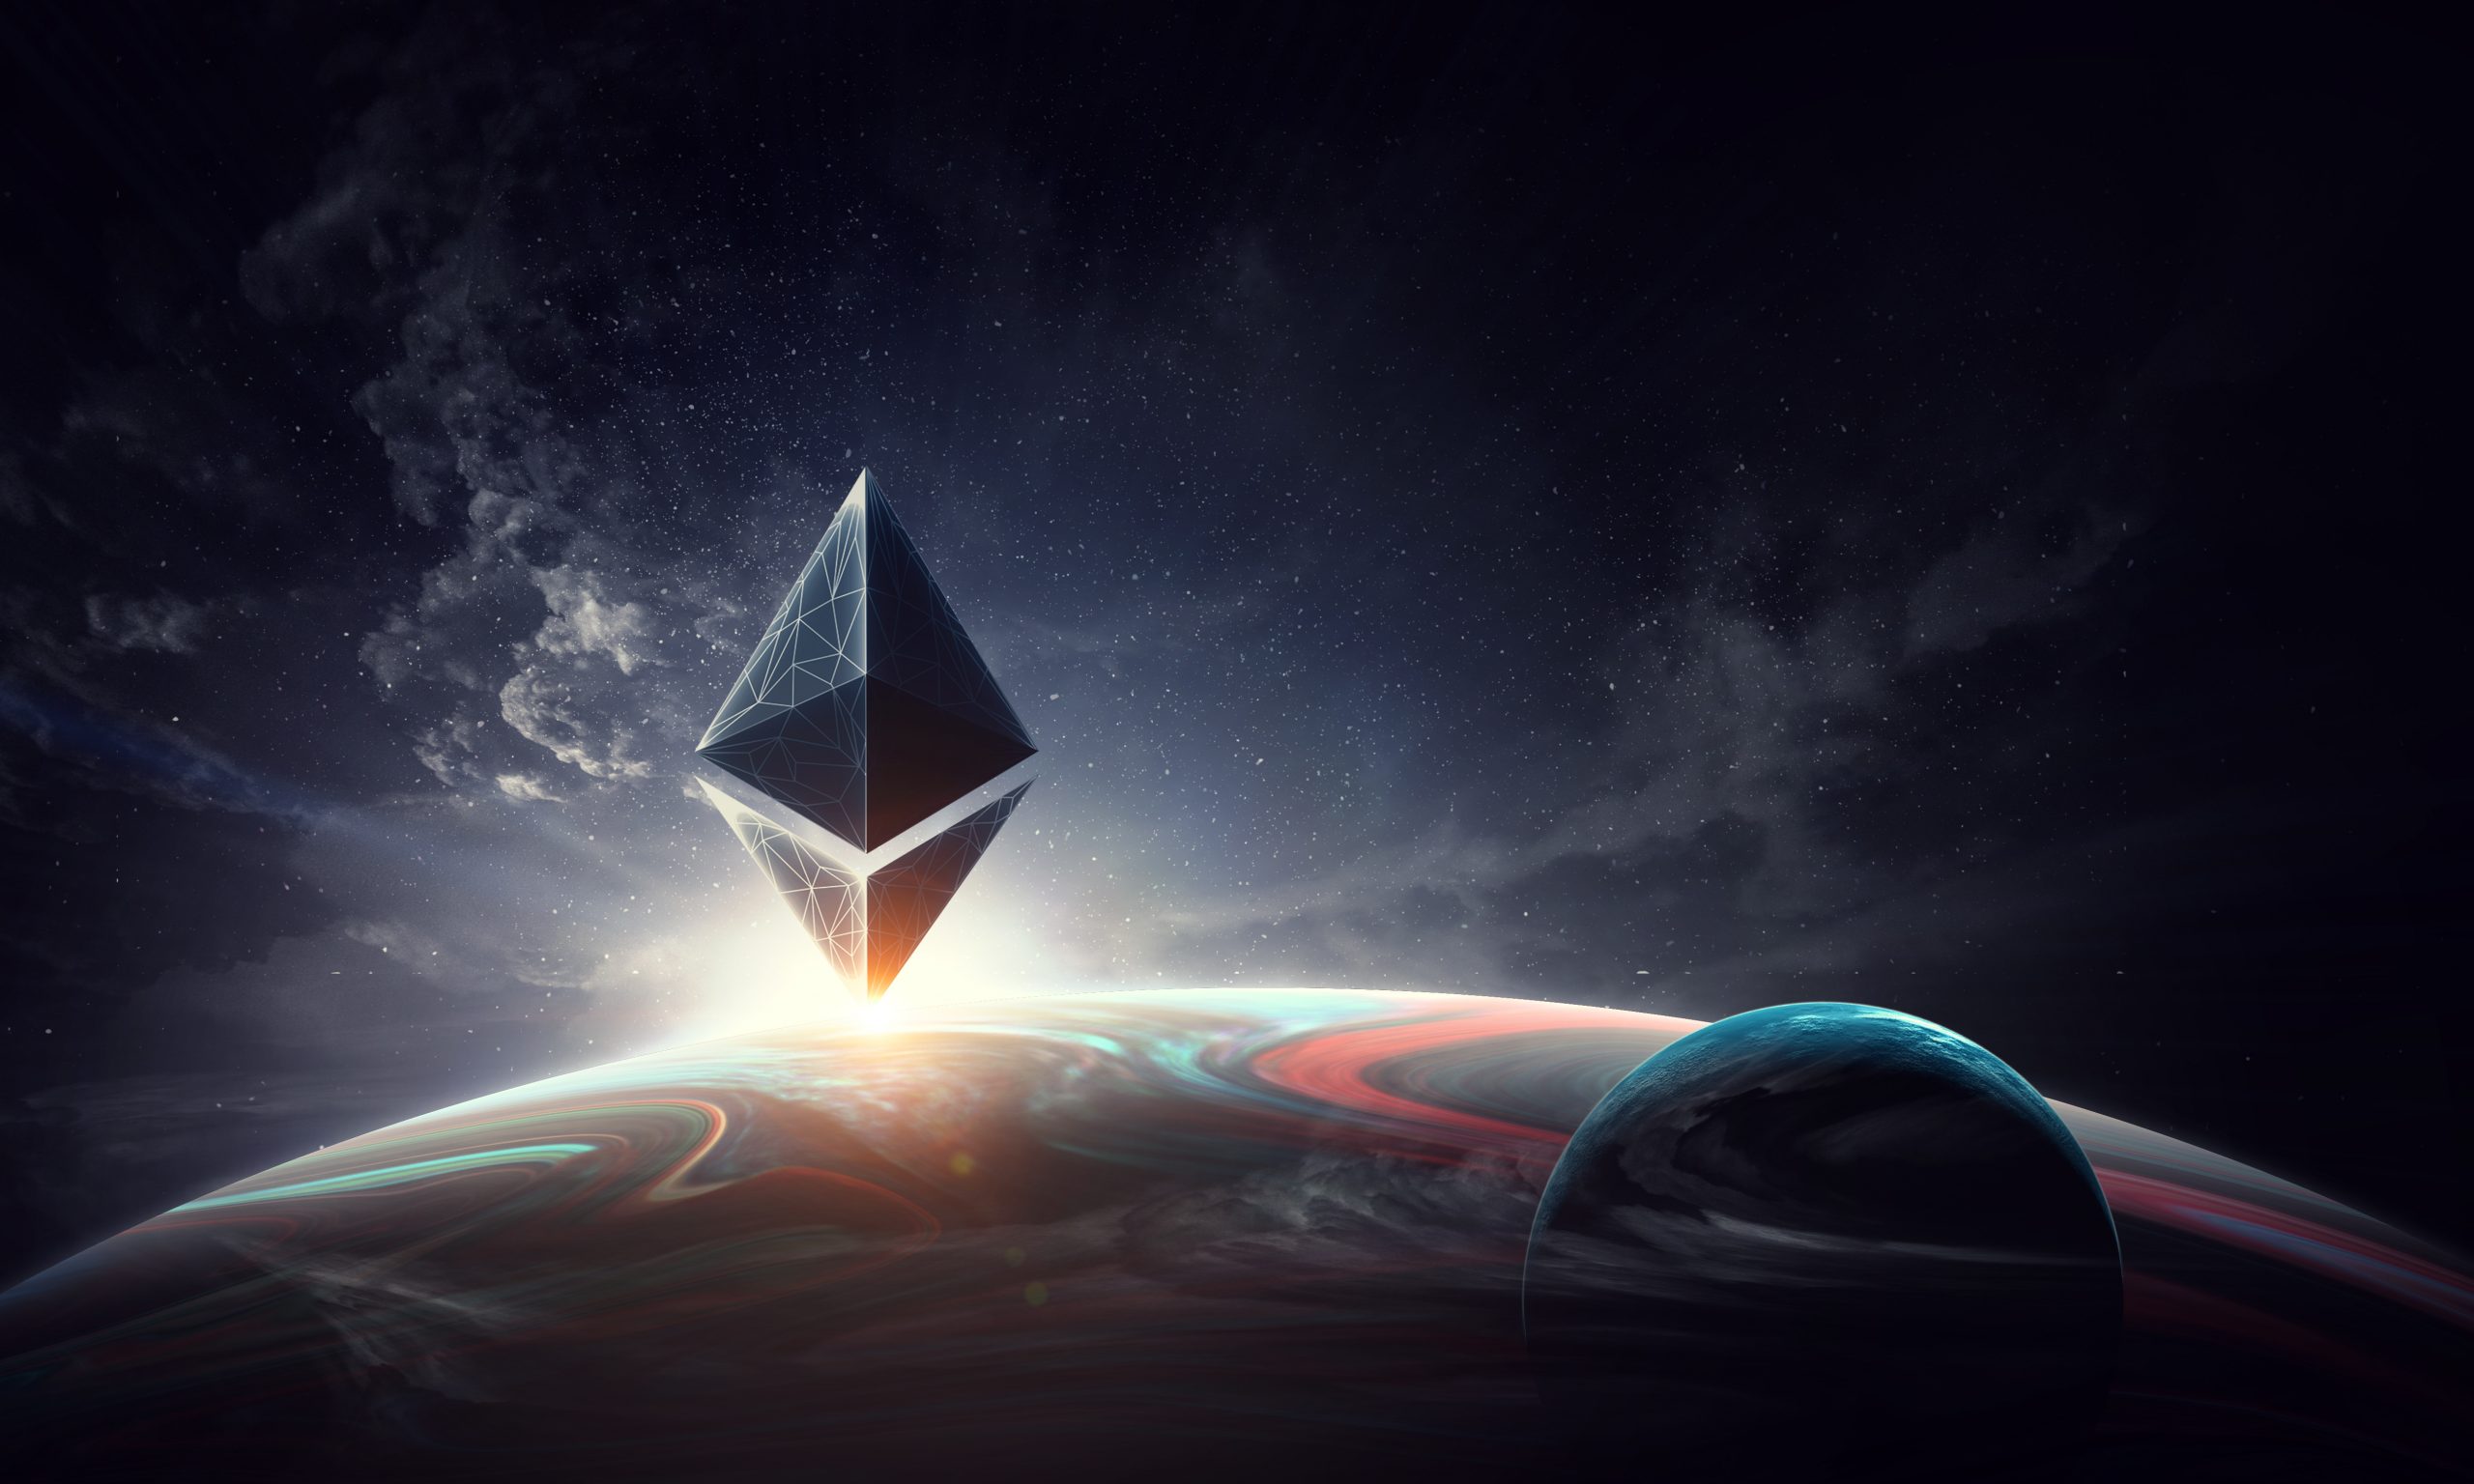 Ethereum News: Can it go up to $ 20,000?